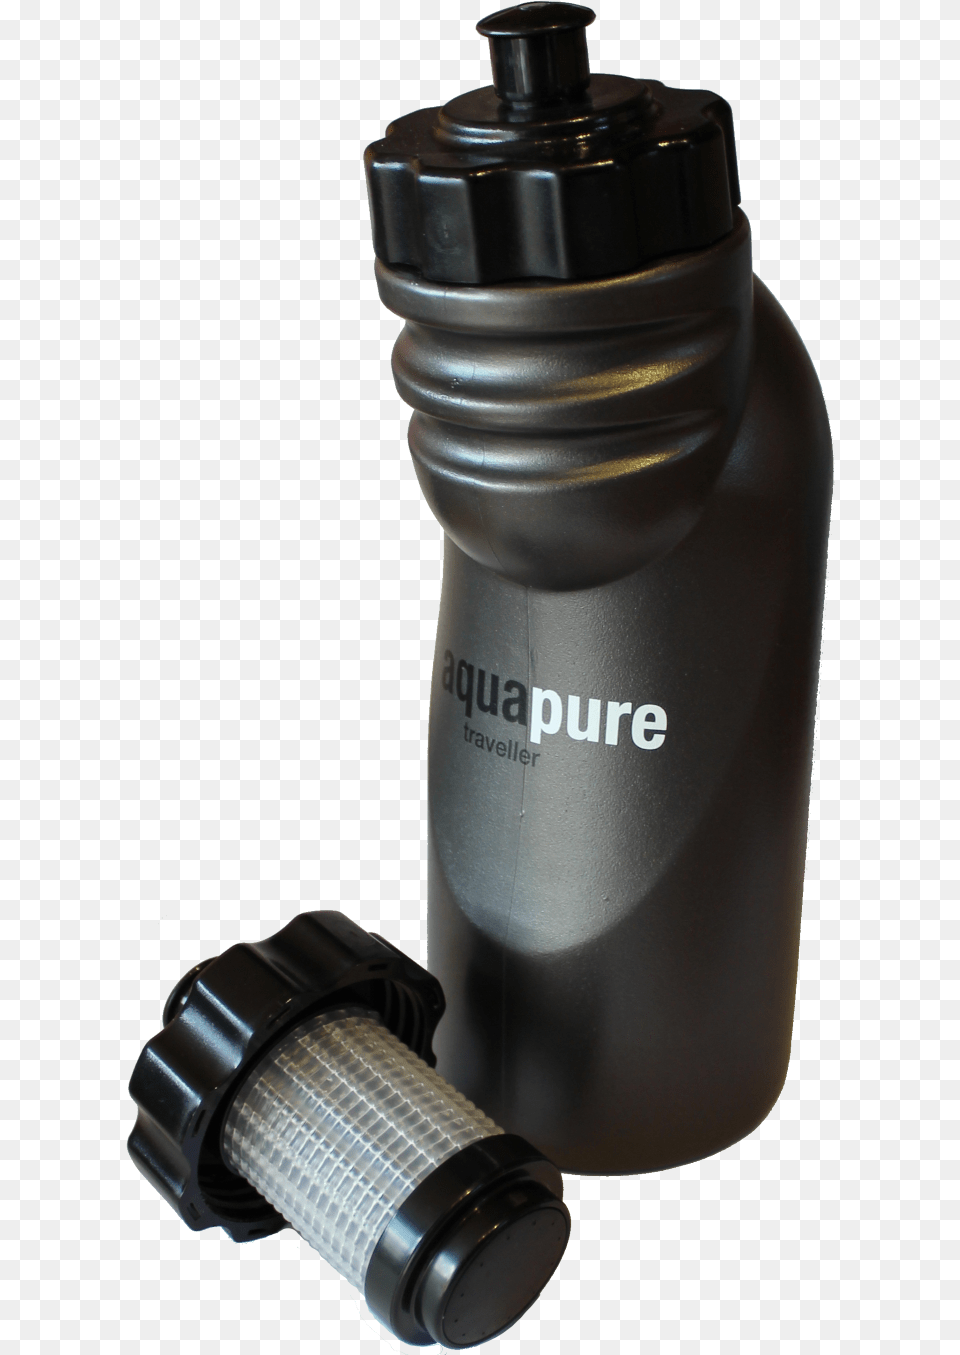 Aquapure Traveller For Protection Against Giardia In Water Bottle, Water Bottle, Shaker Free Png Download